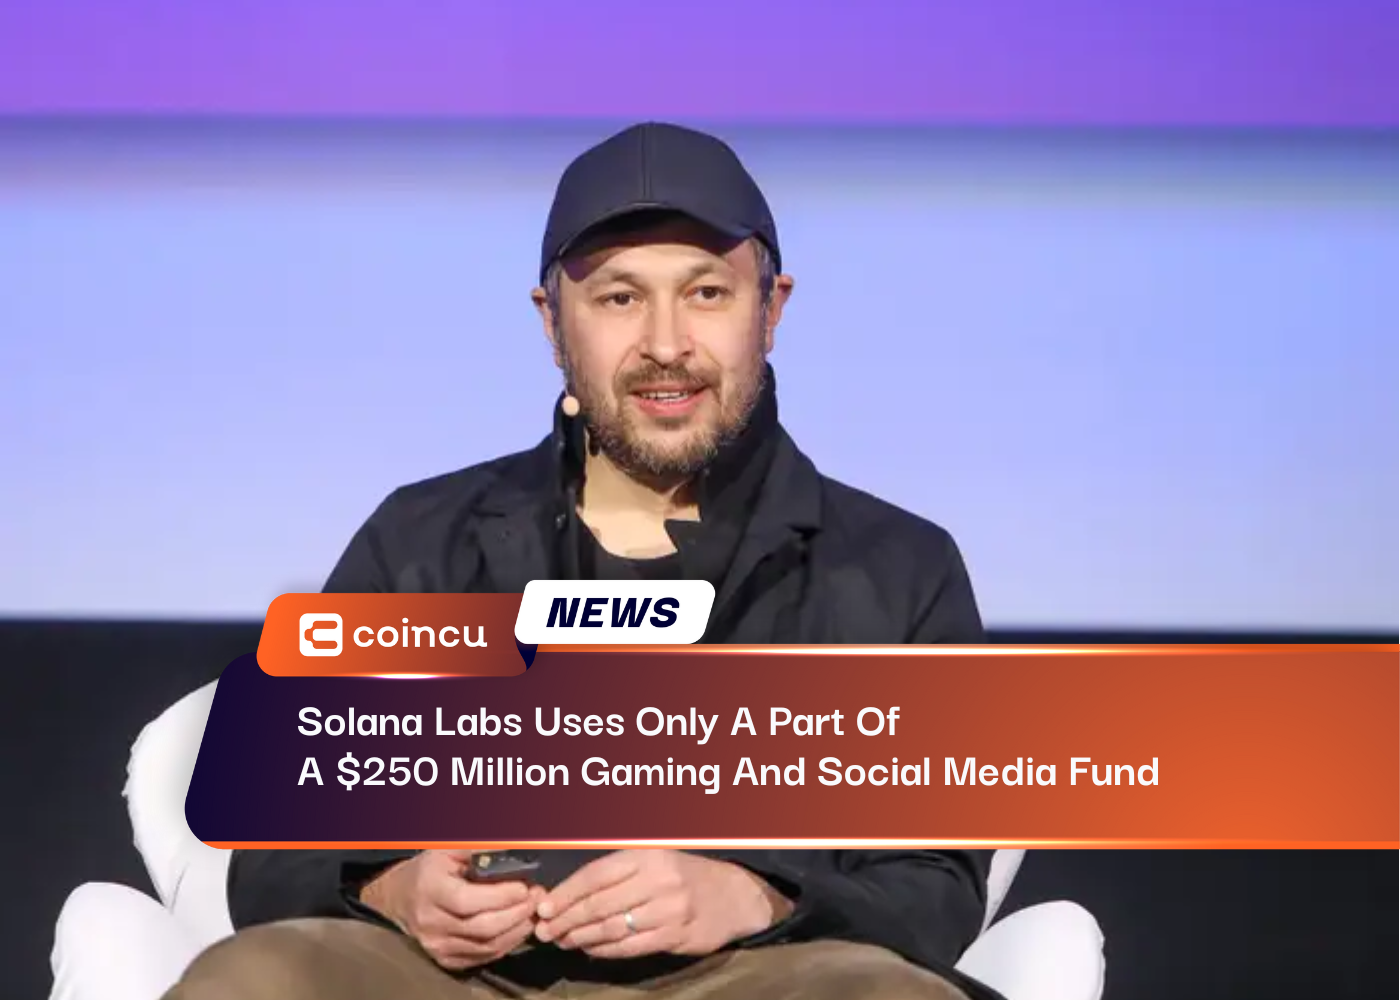 Solana Labs Uses Only A Part Of A $250 Million Gaming And Social Media Fund